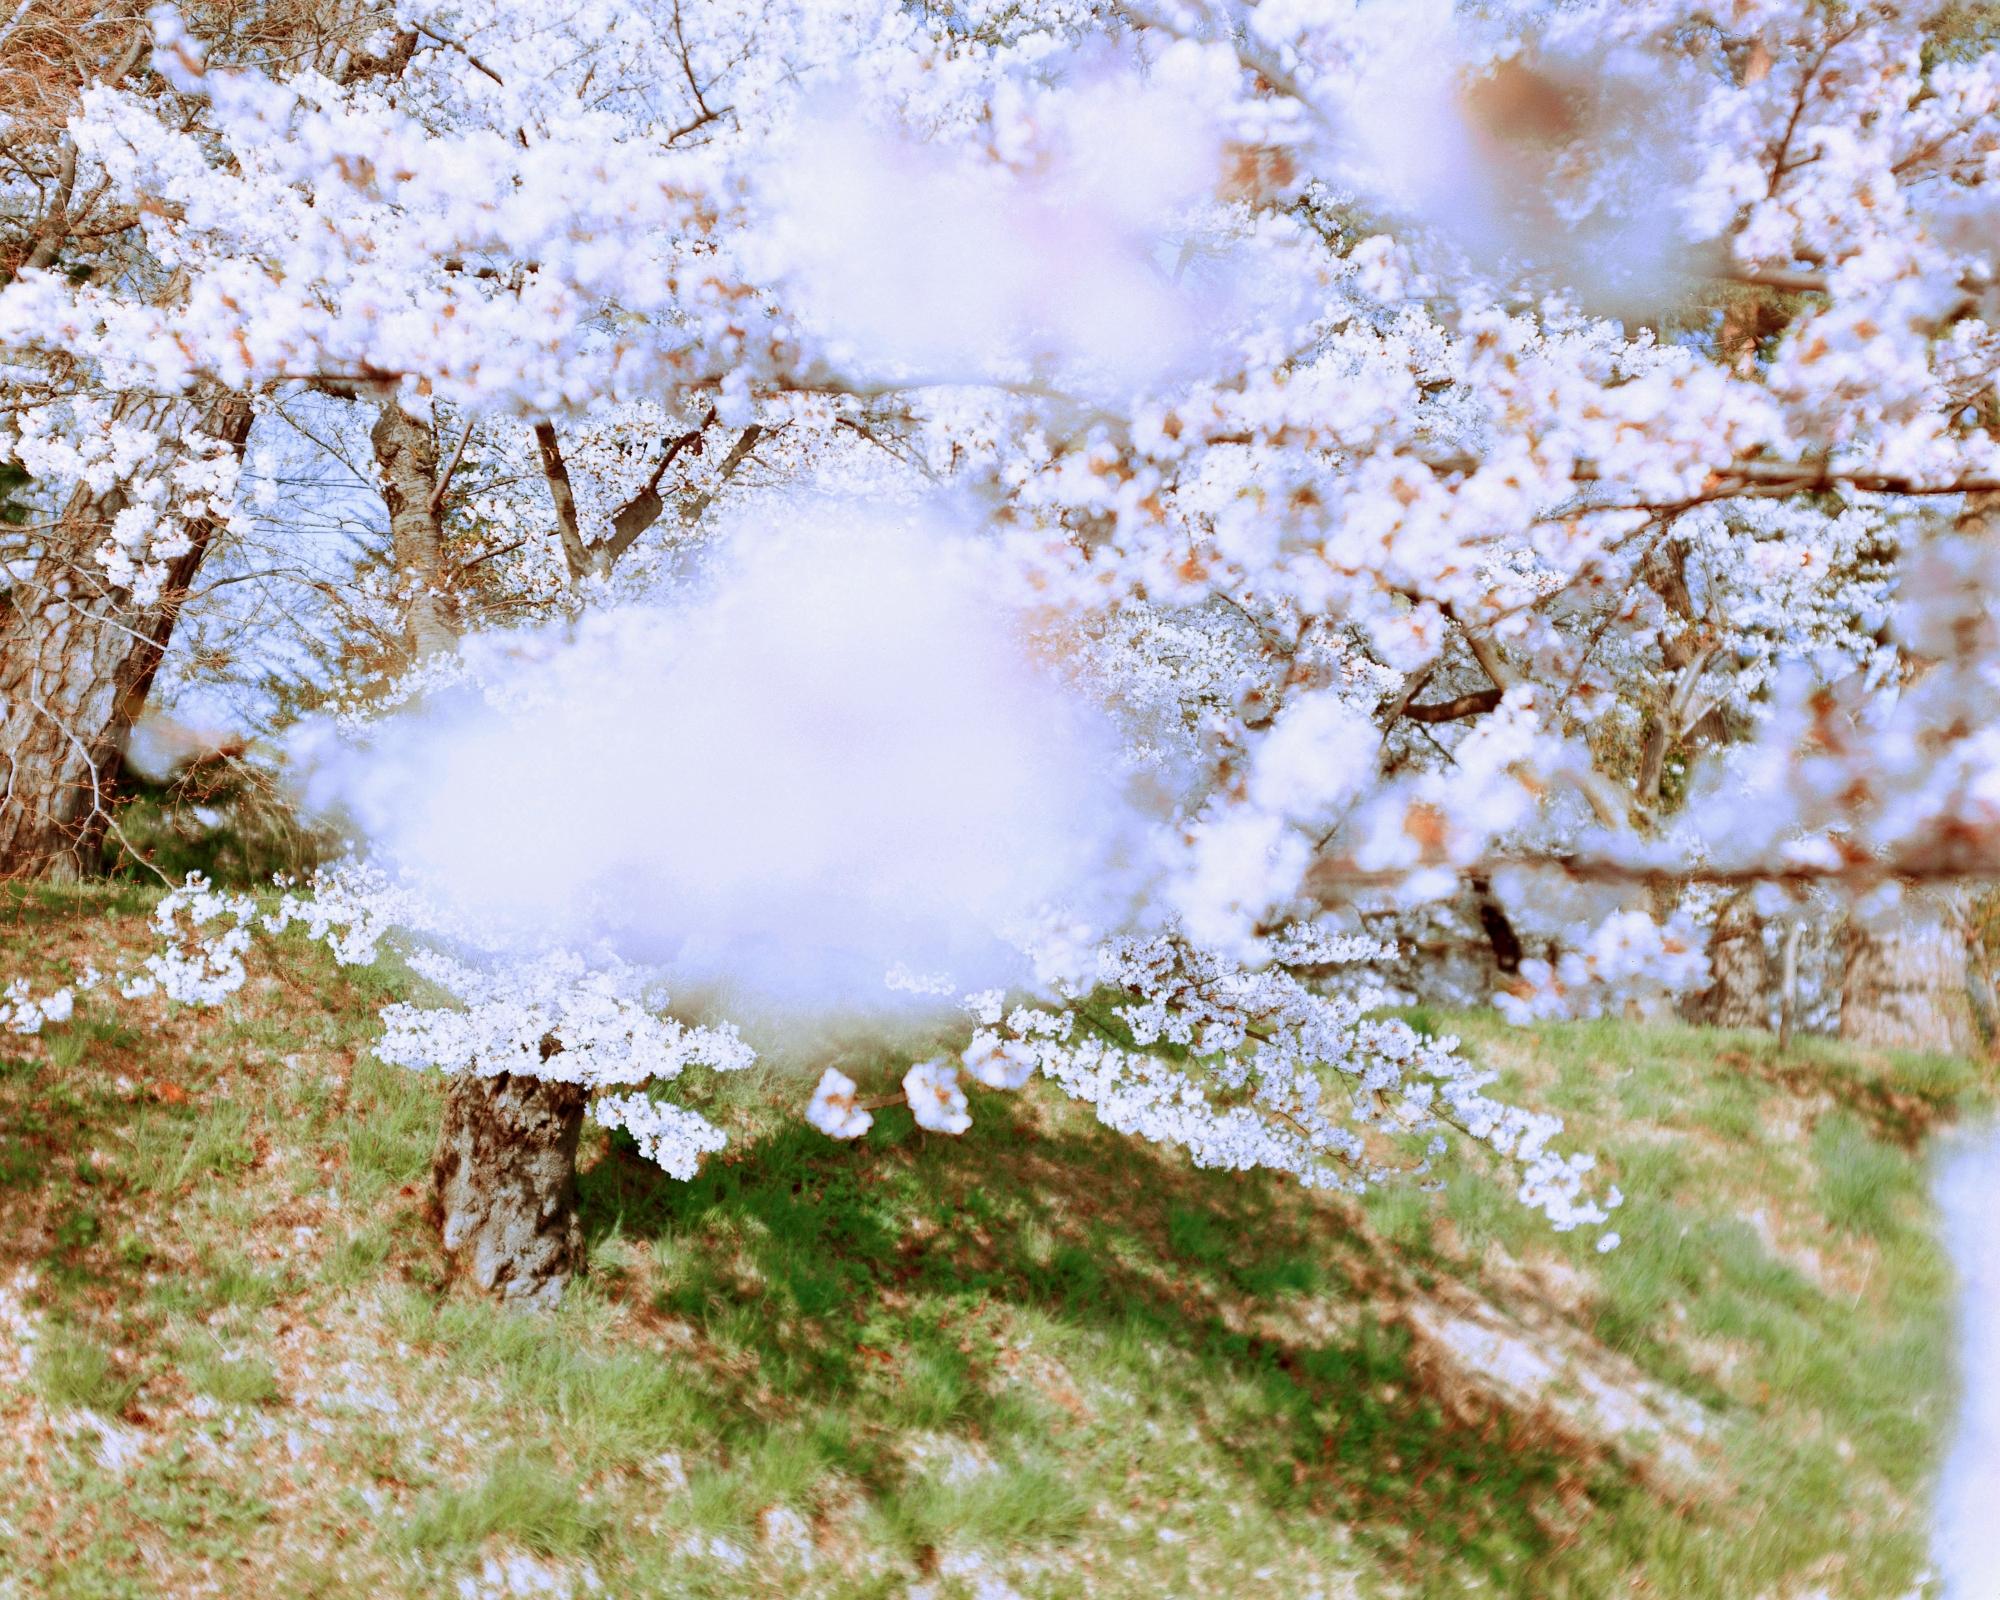 RISAKU SUZUKI (*1963, Japan)
SAKURA 16, 4-75, 2016
Chromogenic print
Sheet 81.3 x 101.6 cm (32 x 40 in.)
Edition of 7 (#1/7)
Print only

The Sakura (Japanese term for ‘cherry blossoms’) Celebration commences in early spring and has inspired artists